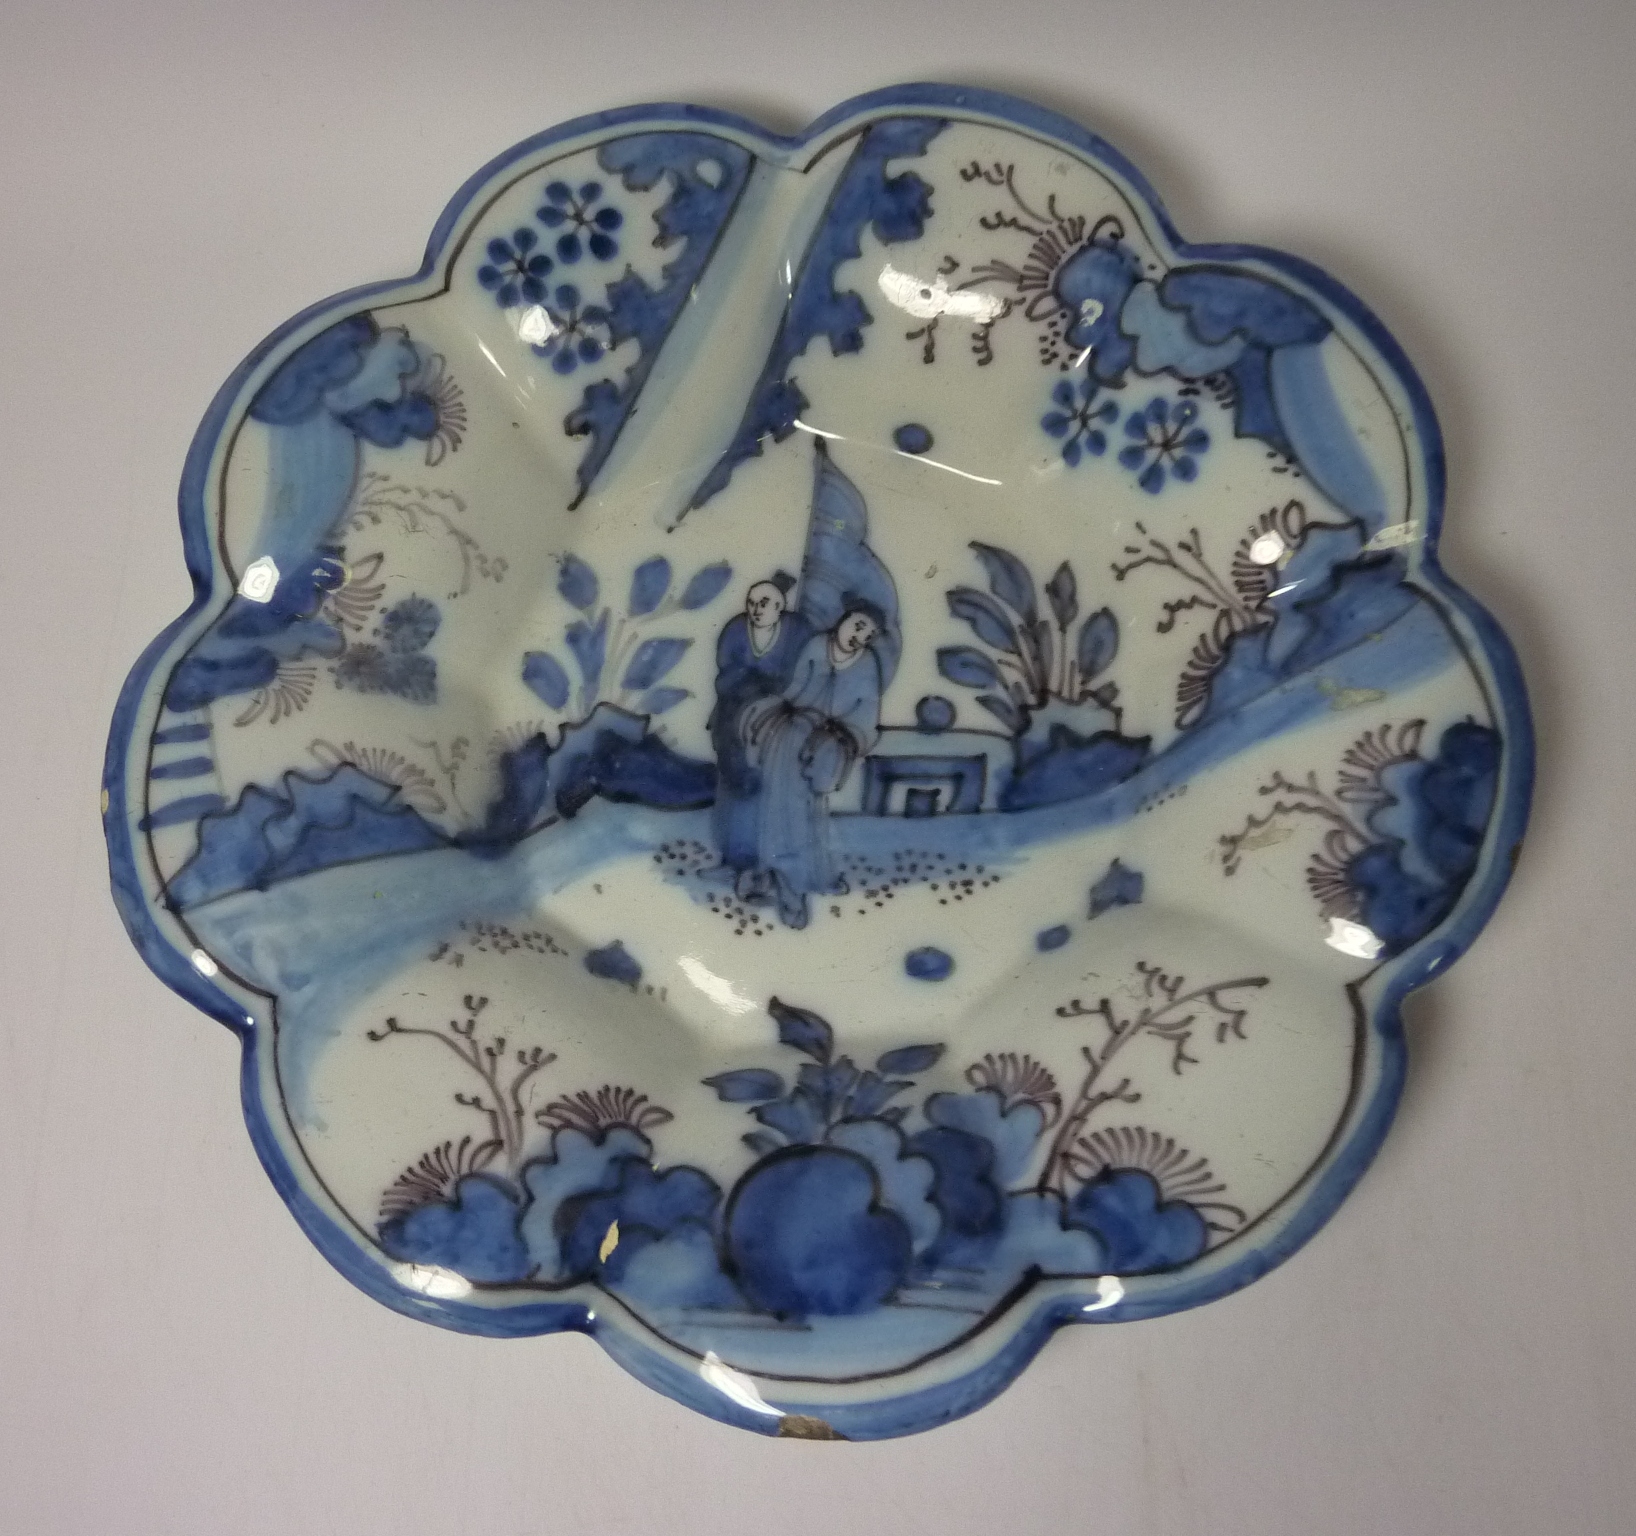 Late 18th/early 19th century tin glazed dish with scalloped border and Chinese style decoration